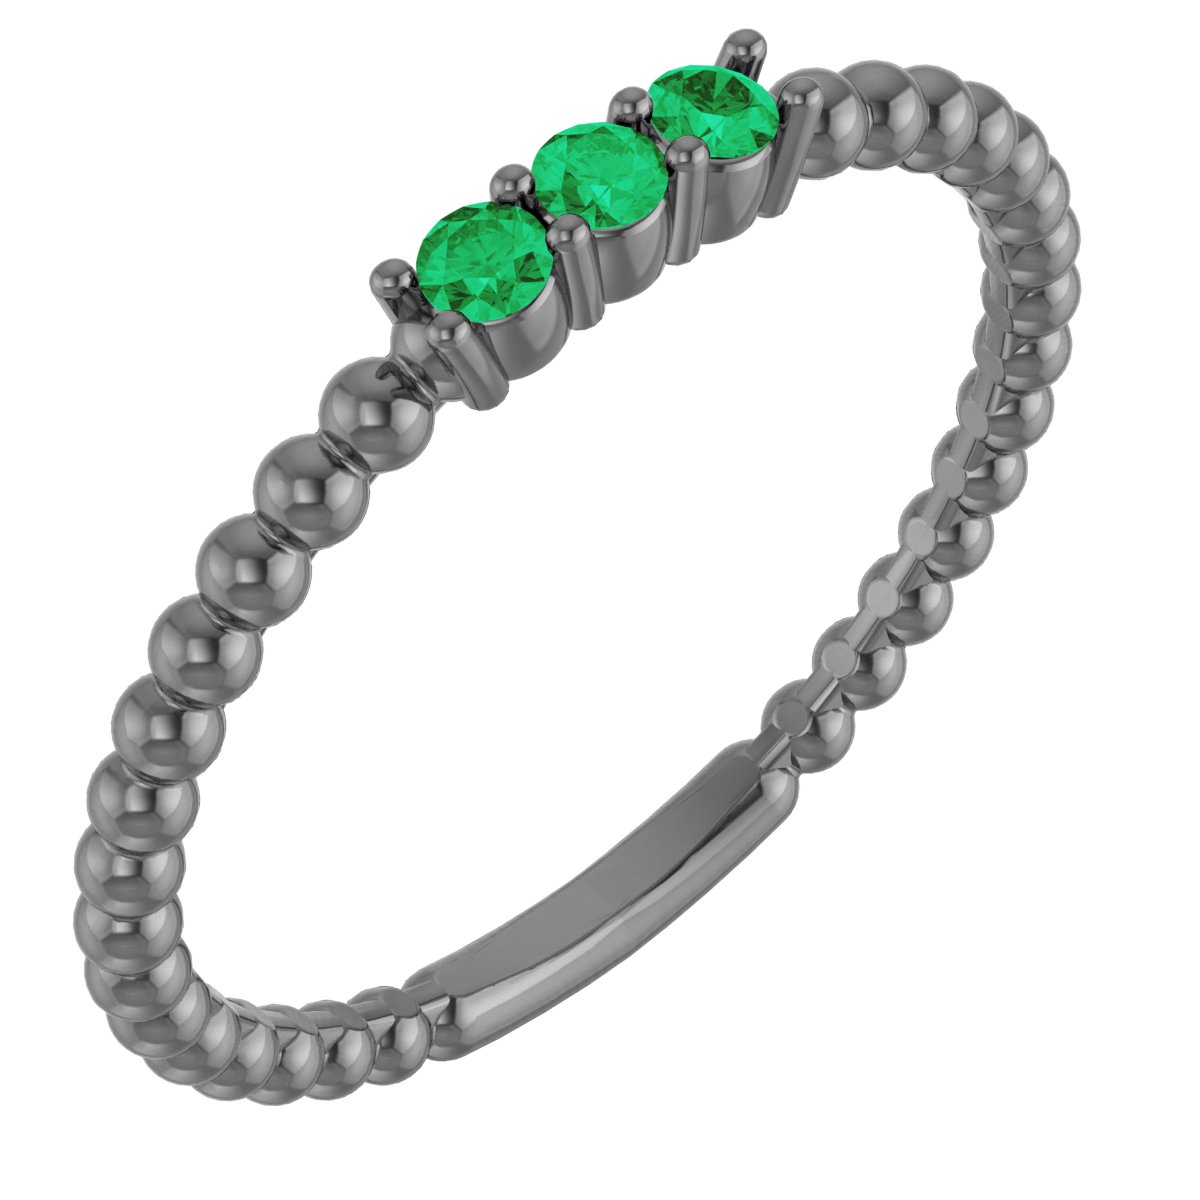 Sterling Silver Lab-Grown Emerald Beaded Ring